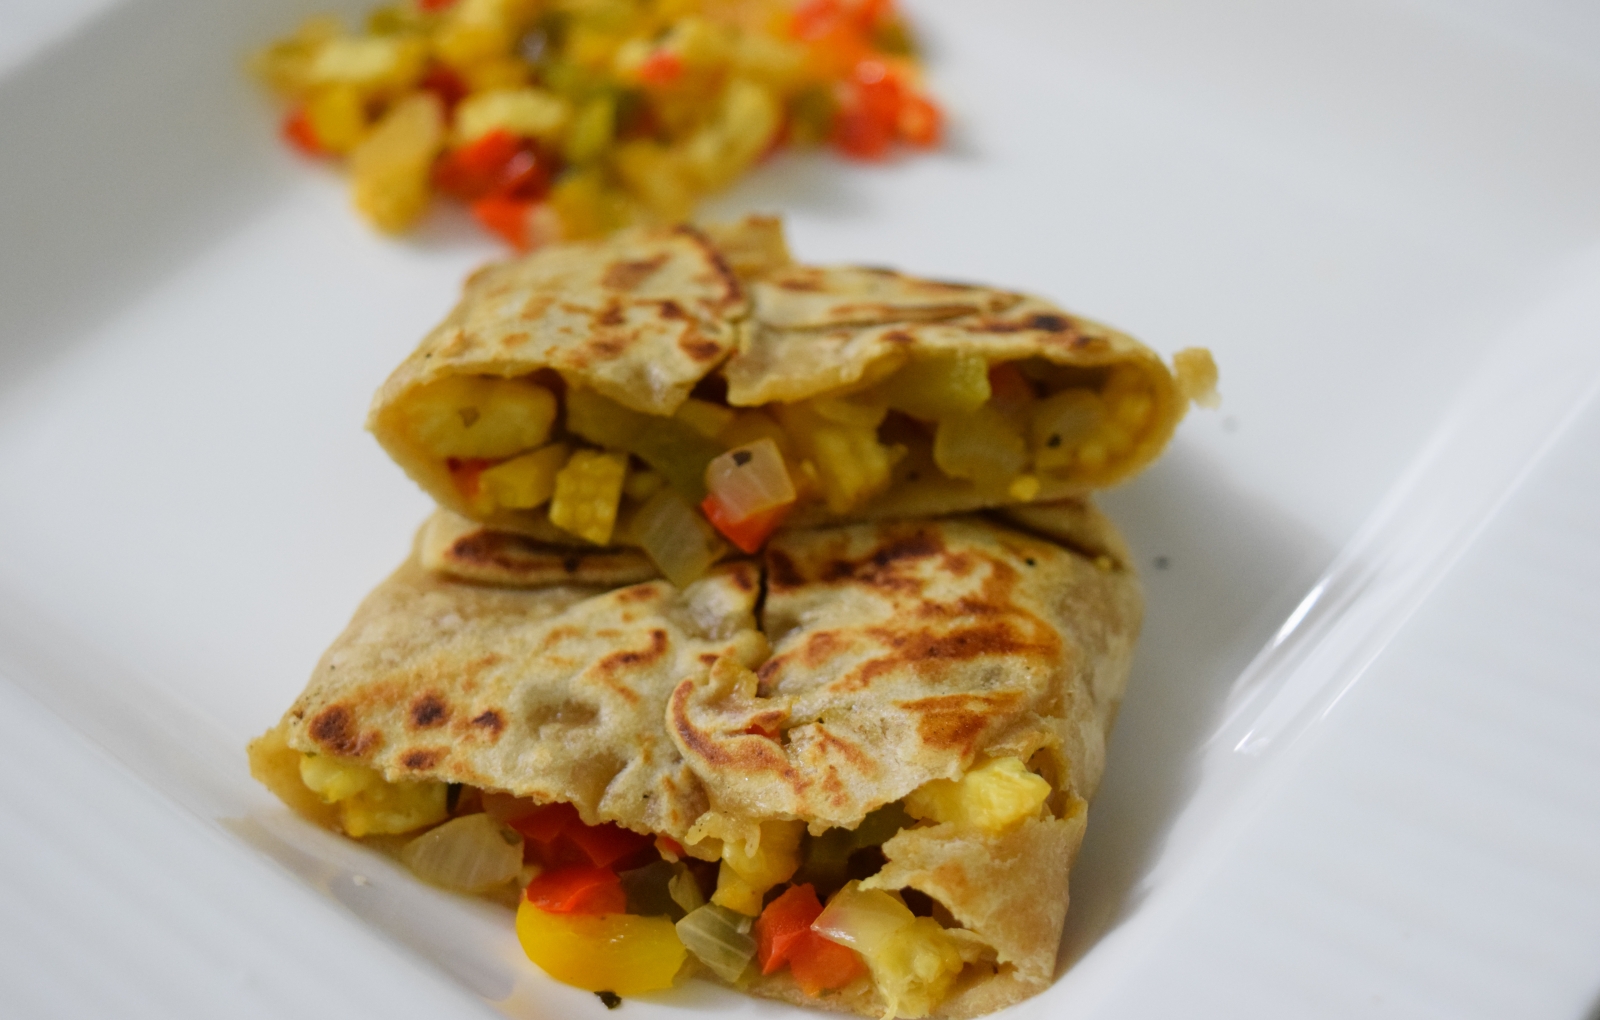 Stuffed Corn and Capsicum Paratha Recipe with Herbs